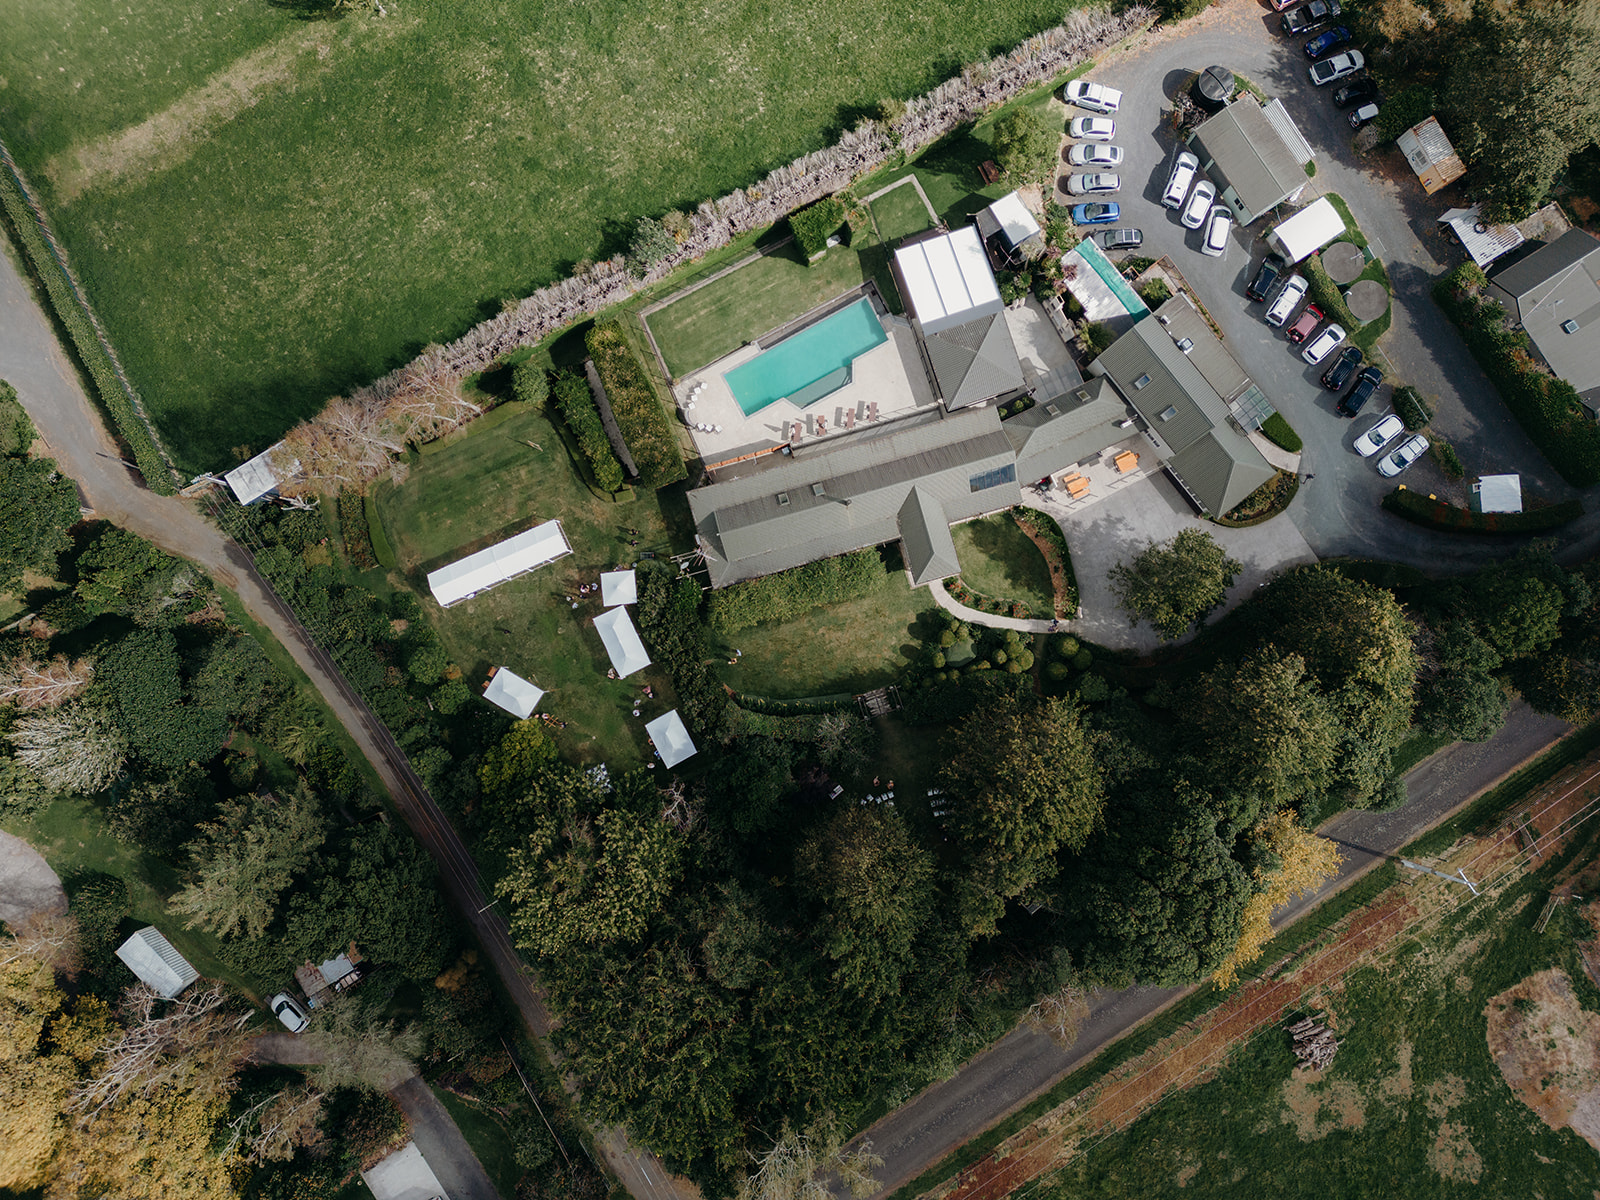 drone photo of Tabula rasa wedding venue on the day of an event